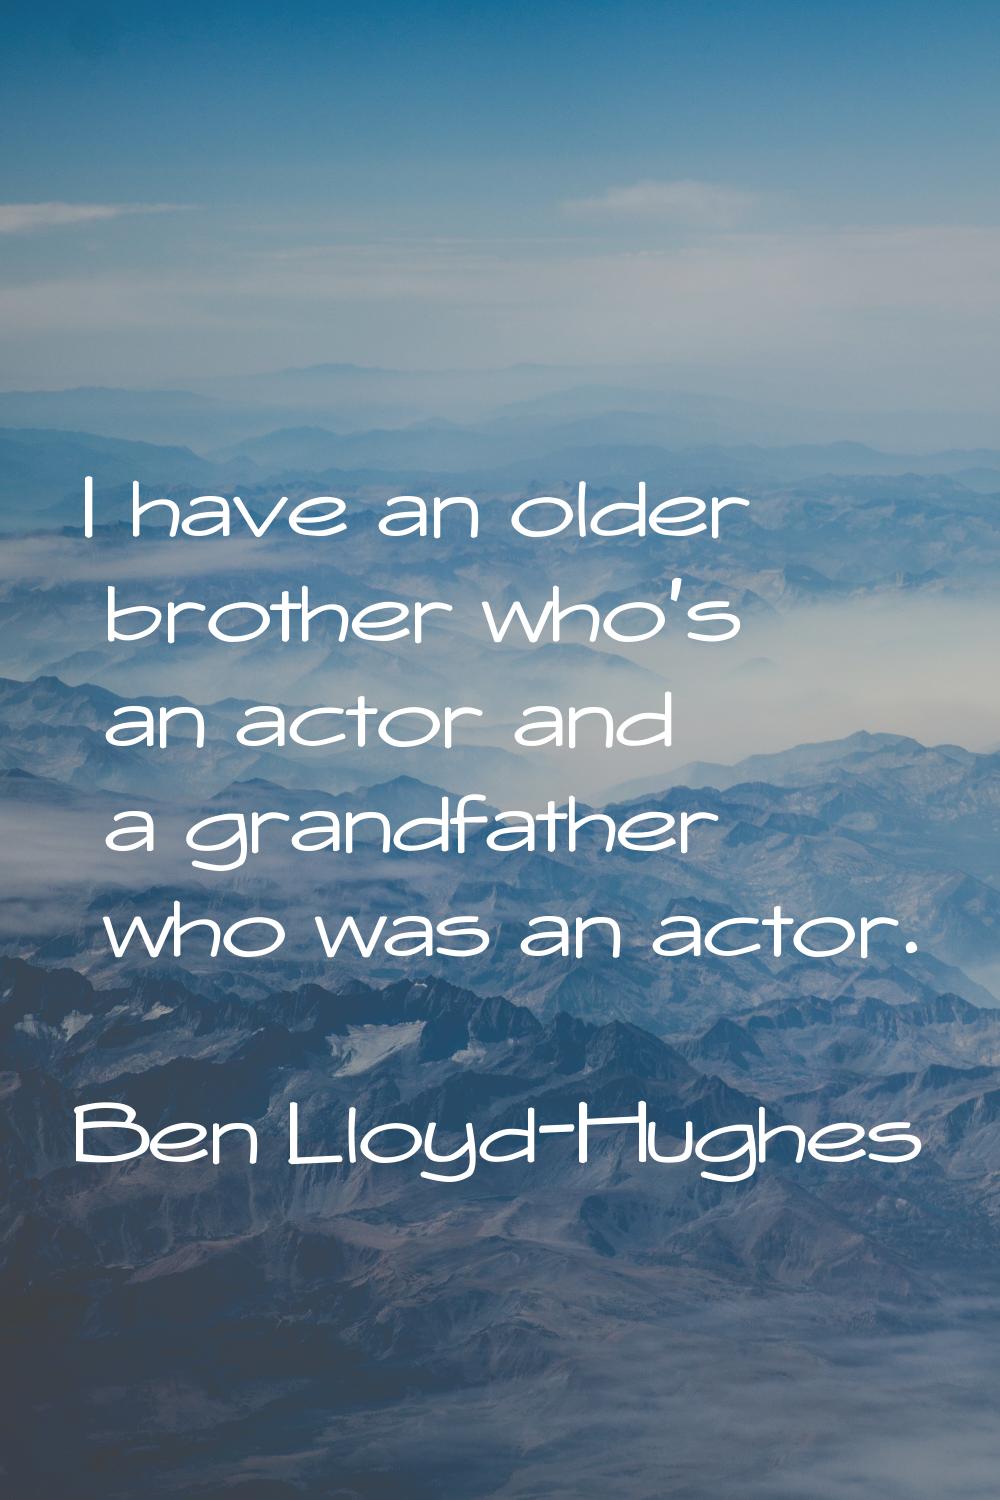 I have an older brother who's an actor and a grandfather who was an actor.